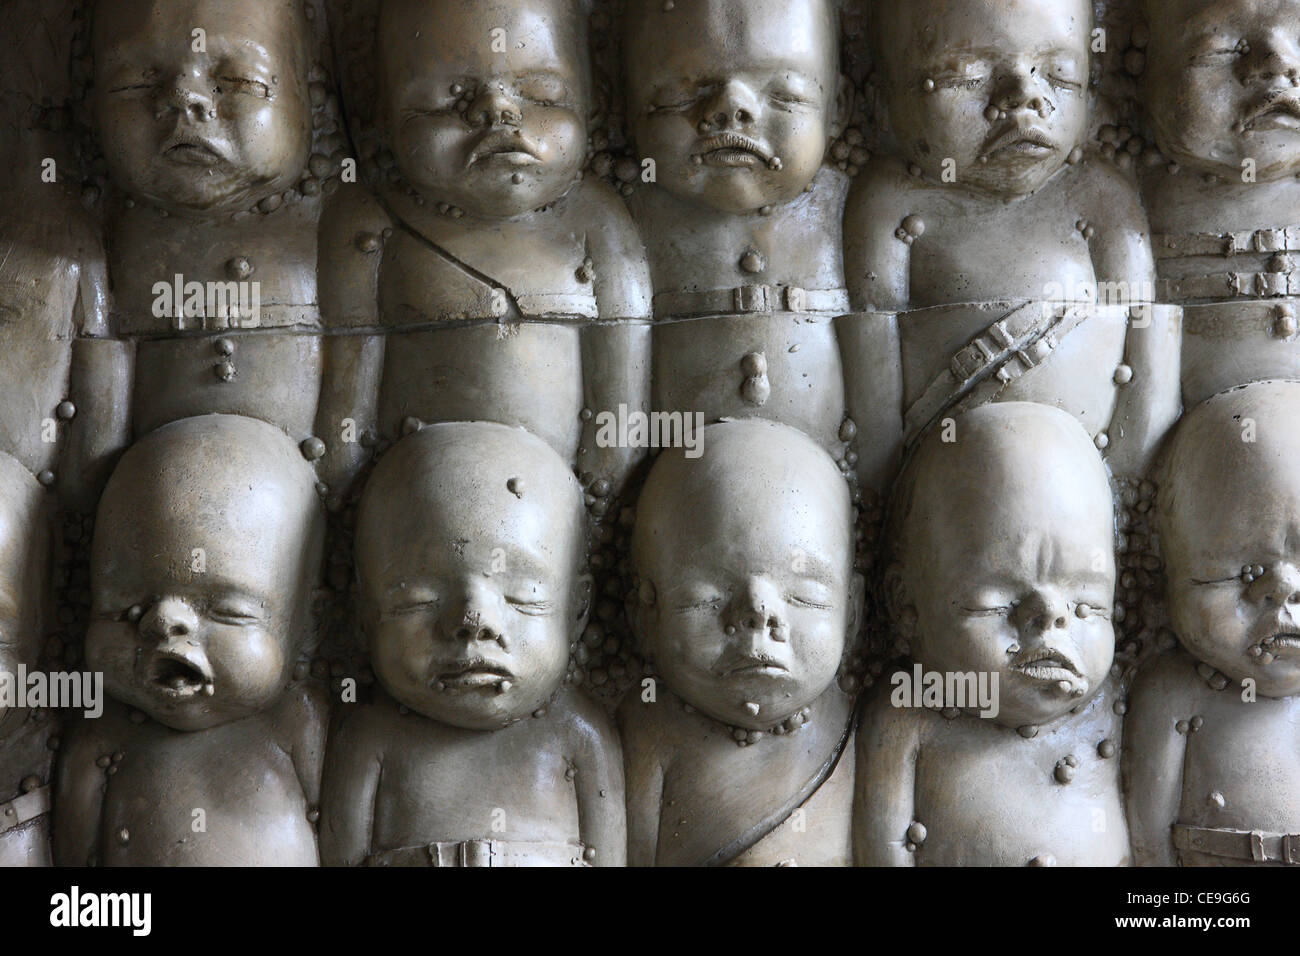 Faces of children in 'Alien Cafe' by H.R. Giger in Gruyères, Switzerland. Stock Photo